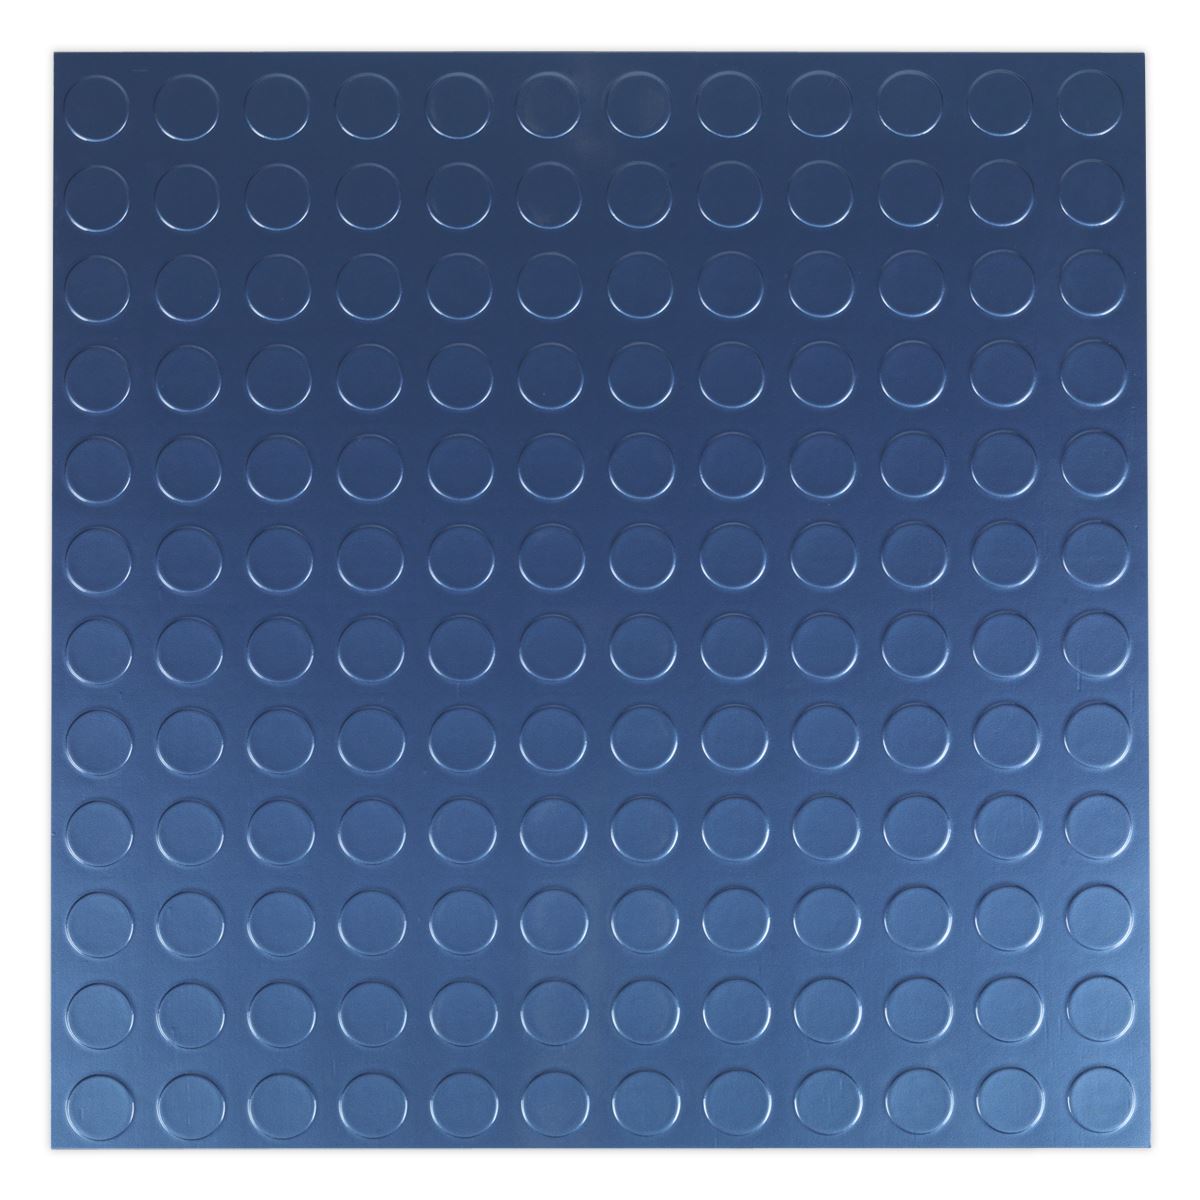 Sealey Vinyl Floor Tile with Peel & Stick Backing - Blue Coin Pack of 16